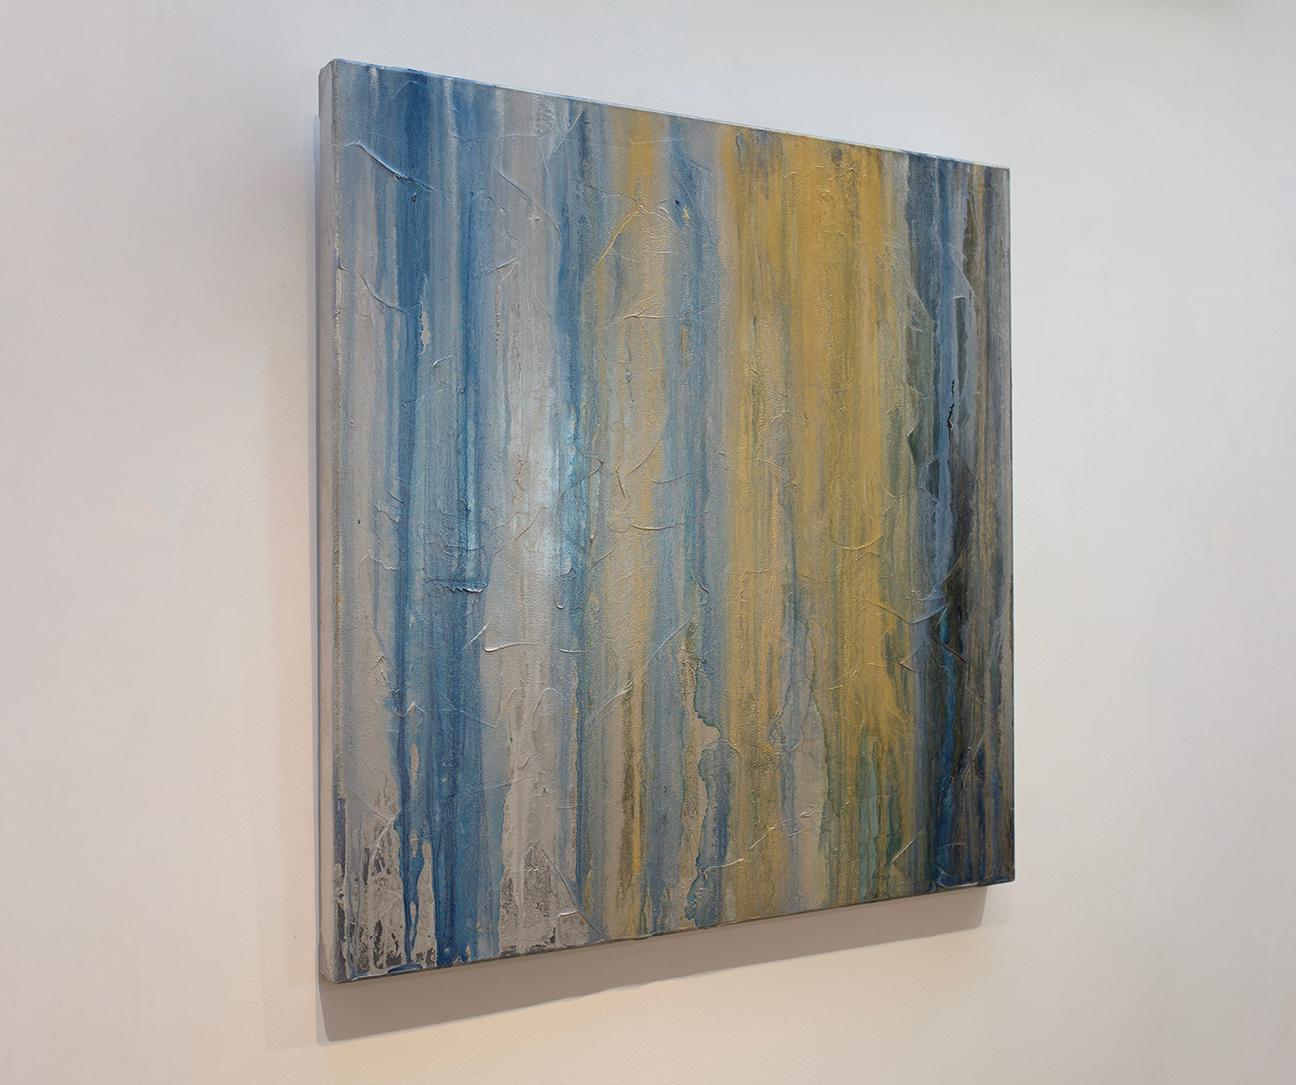 Sand, collection, contemporary, minimalist, colorful, drip, layers, mist, fog, grey, gray, blue, ice, series, influenced by Pat Steir.

Each painting is 30 x 30 inches hung together across they are over60 inches.  If spaced more depending on your